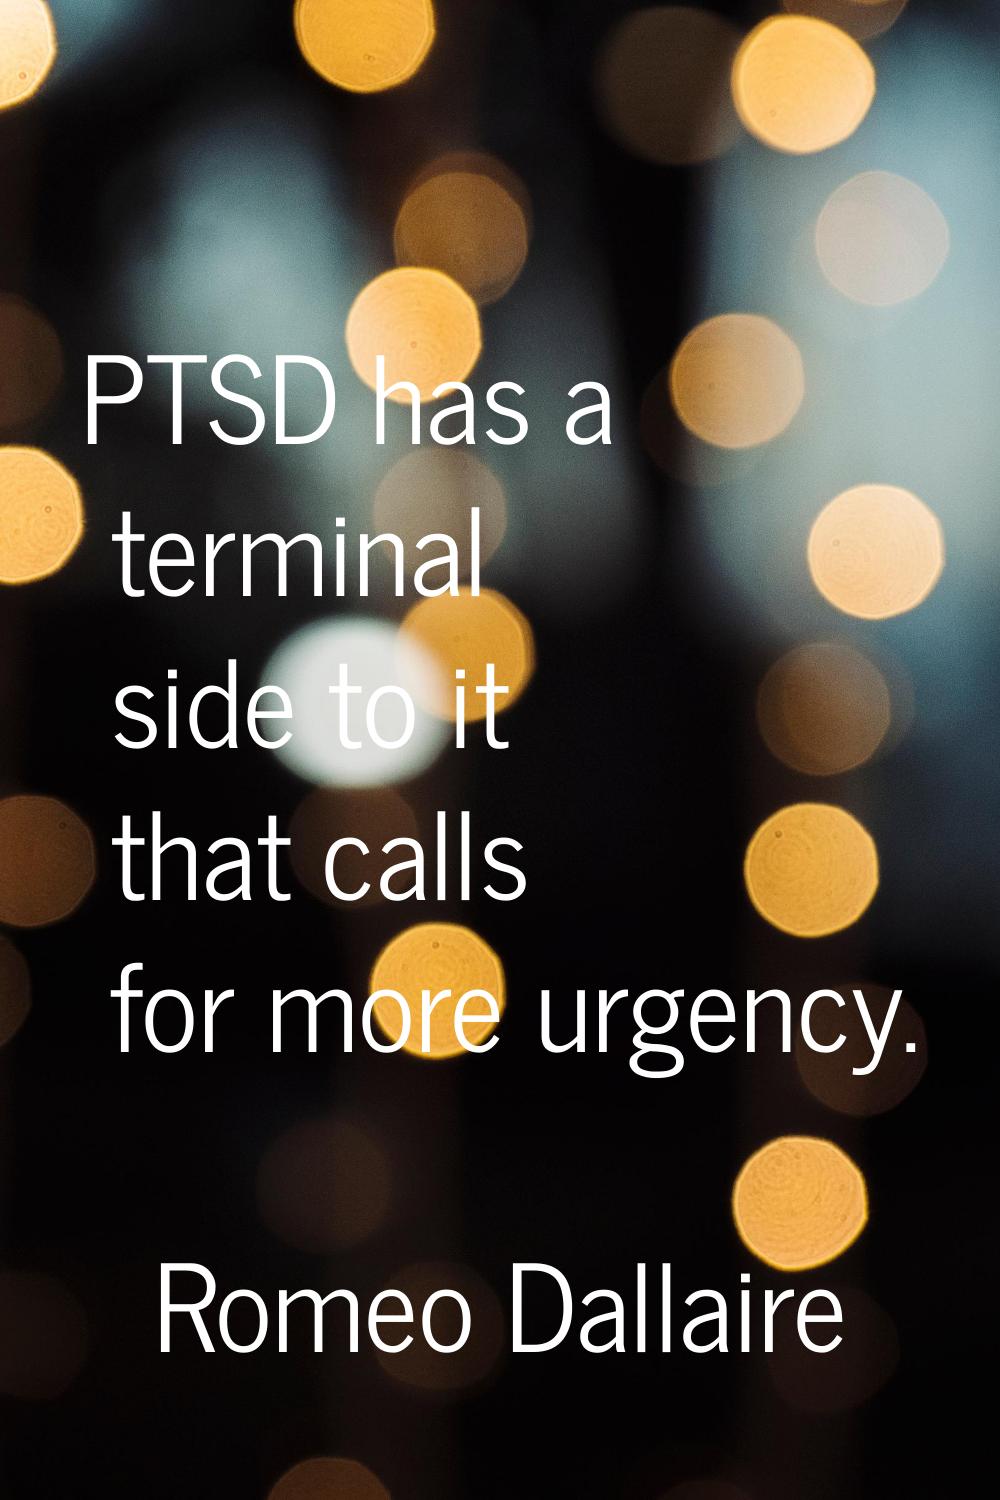 PTSD has a terminal side to it that calls for more urgency.